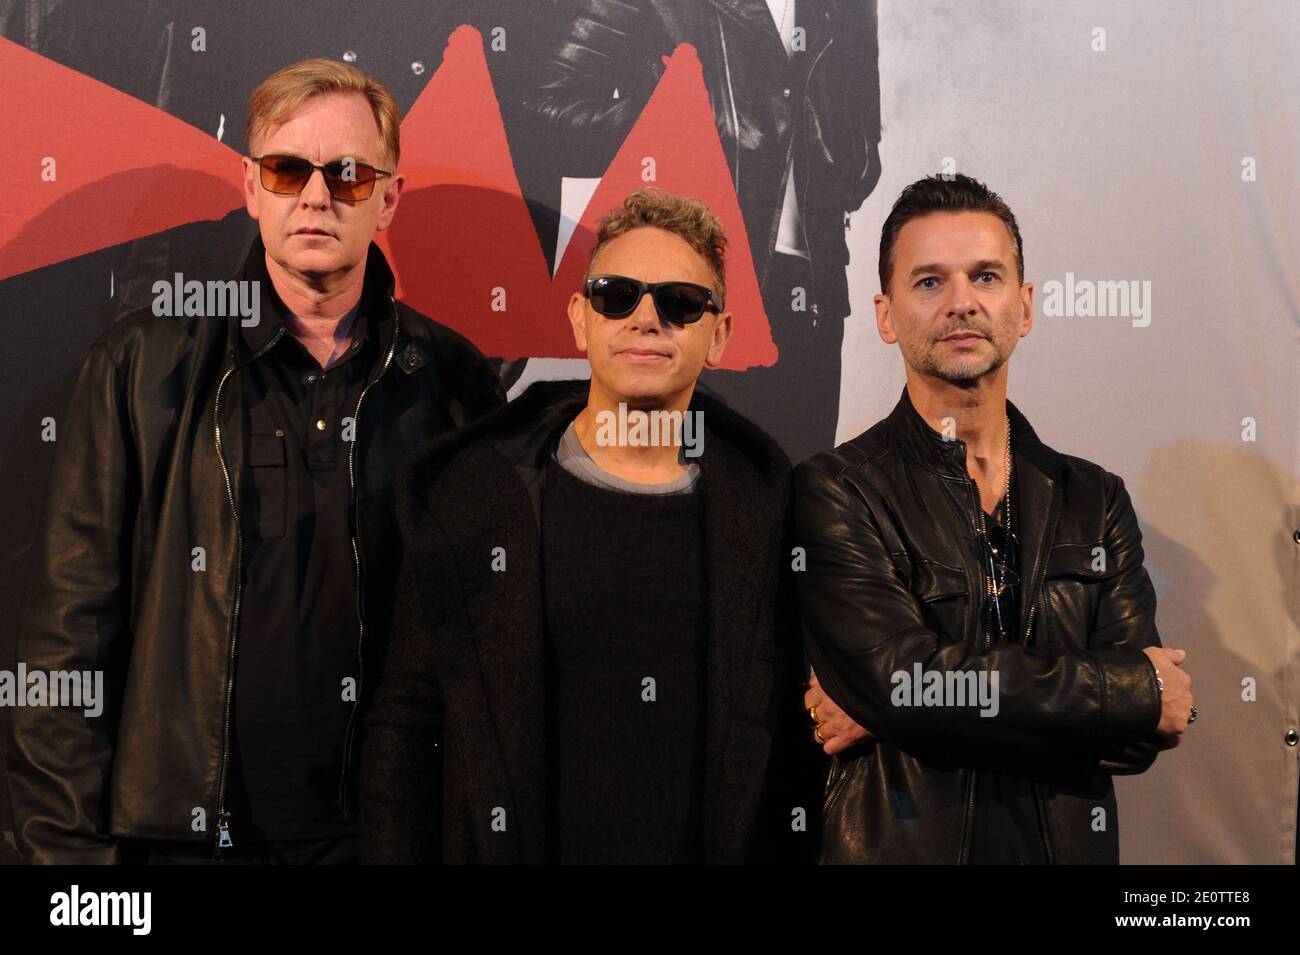 Depeche Mode: Tickets now on sale for band's only UK 2017 gig